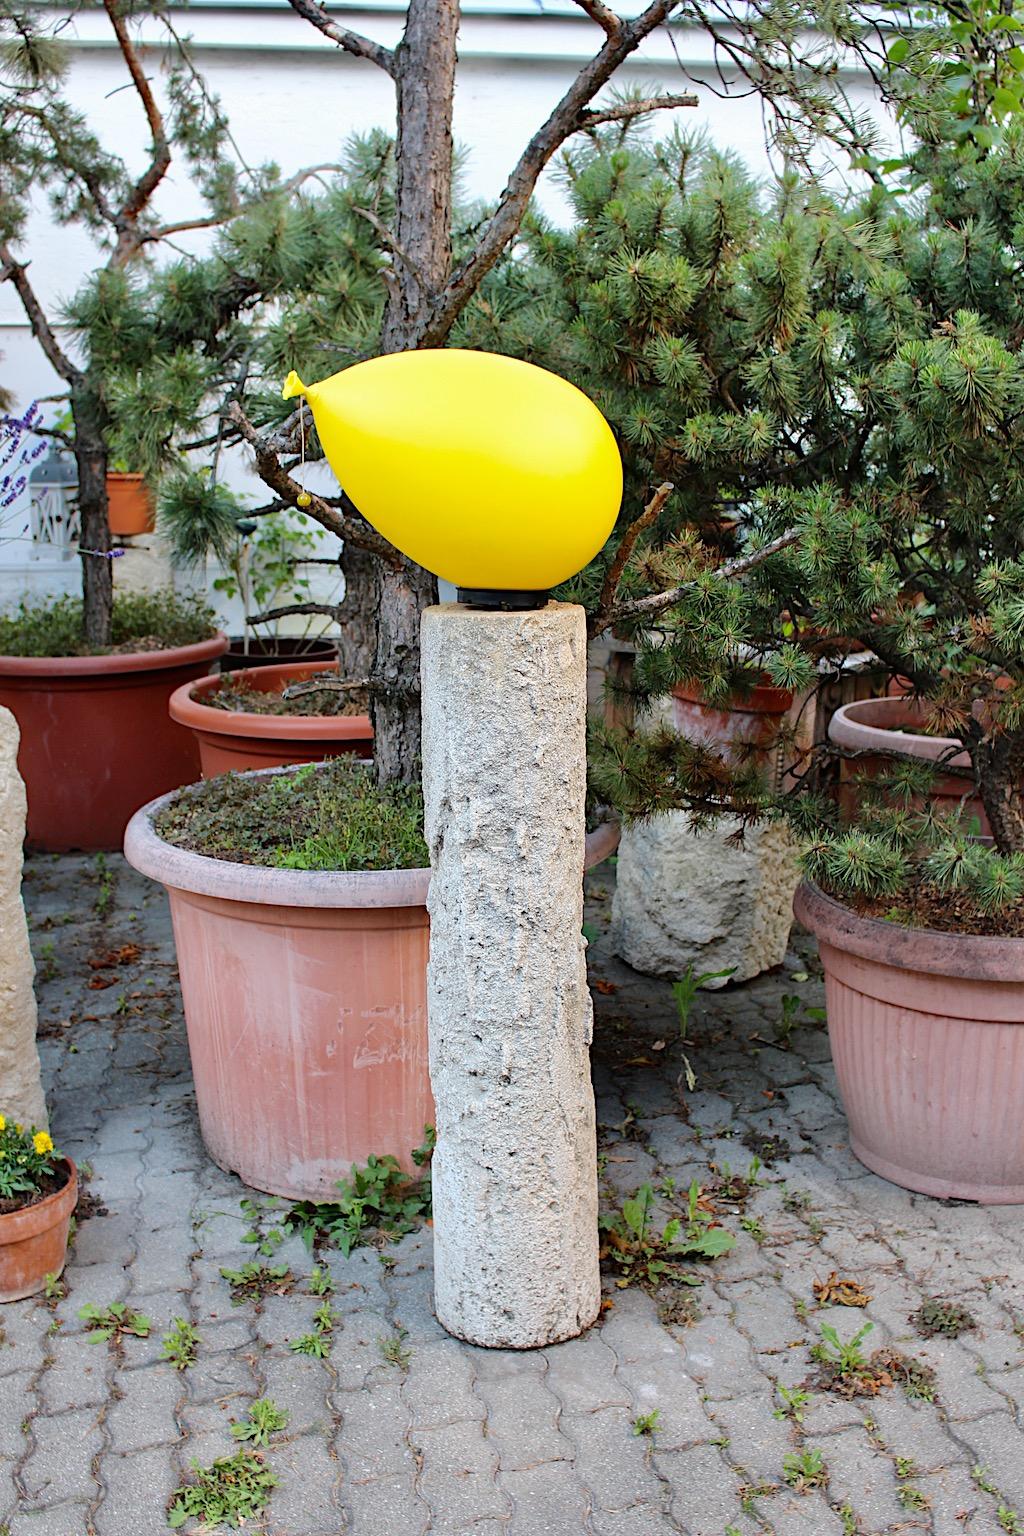 Modern yellow vintage balloon lamp or flush mount from plastic by Yves Christin for Bilumen, 1980s, Italy.
Yves Christin designed the iconic lighting for Bilumen Italy in the 1980s.The flush mount could also be used as a sconce.
The large size